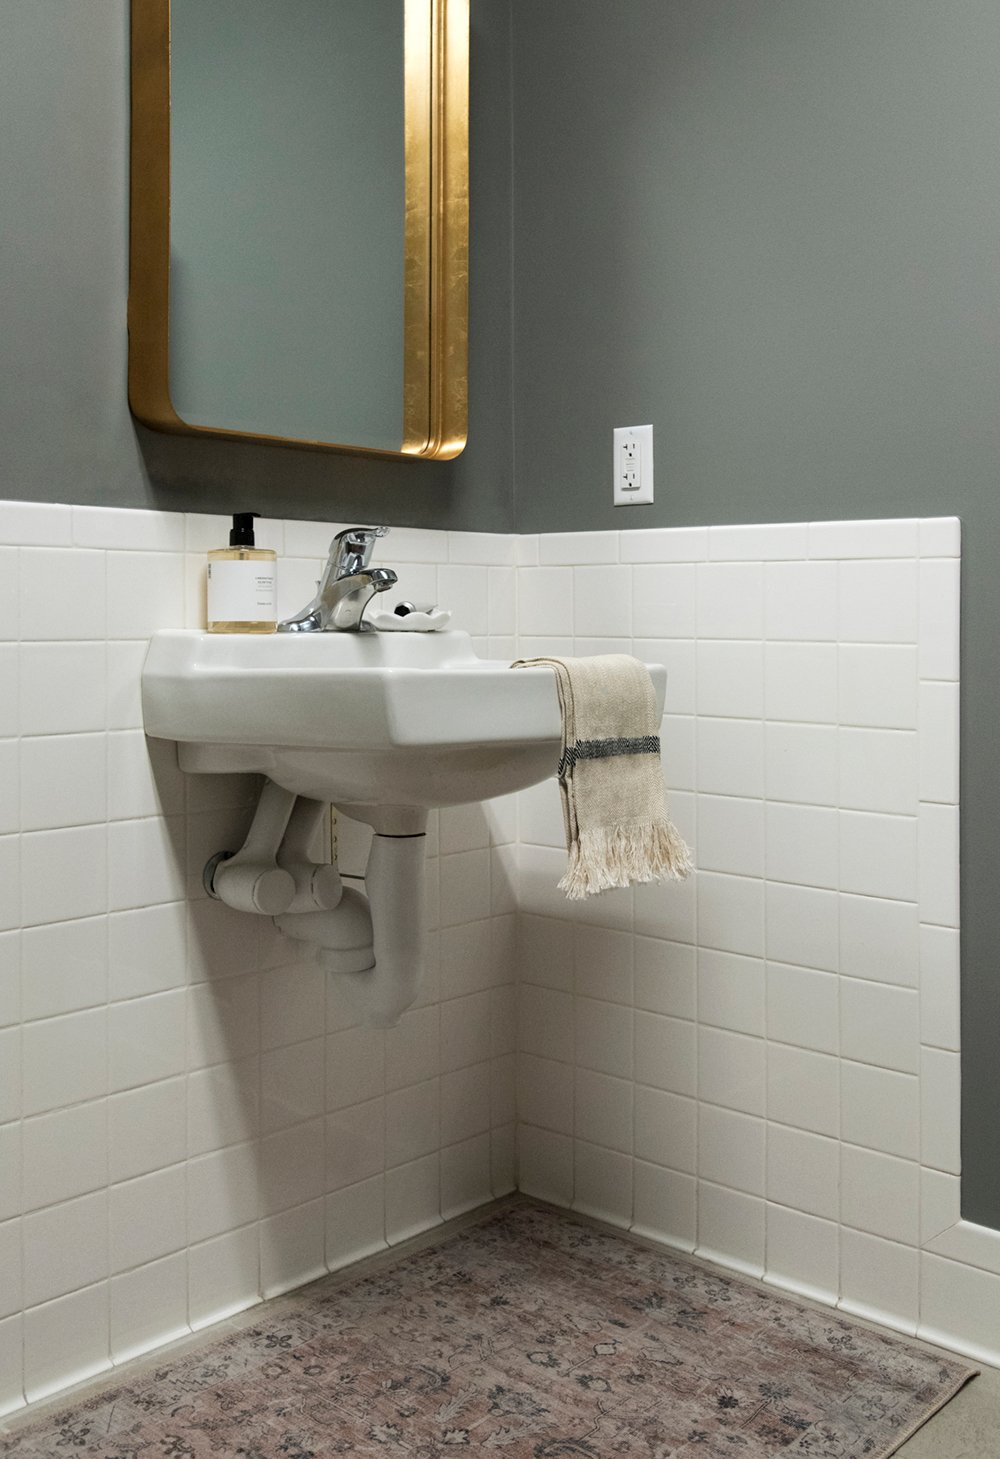 Office Bathroom Makeover & Seasonal Home Finds - roomfortuesday.com